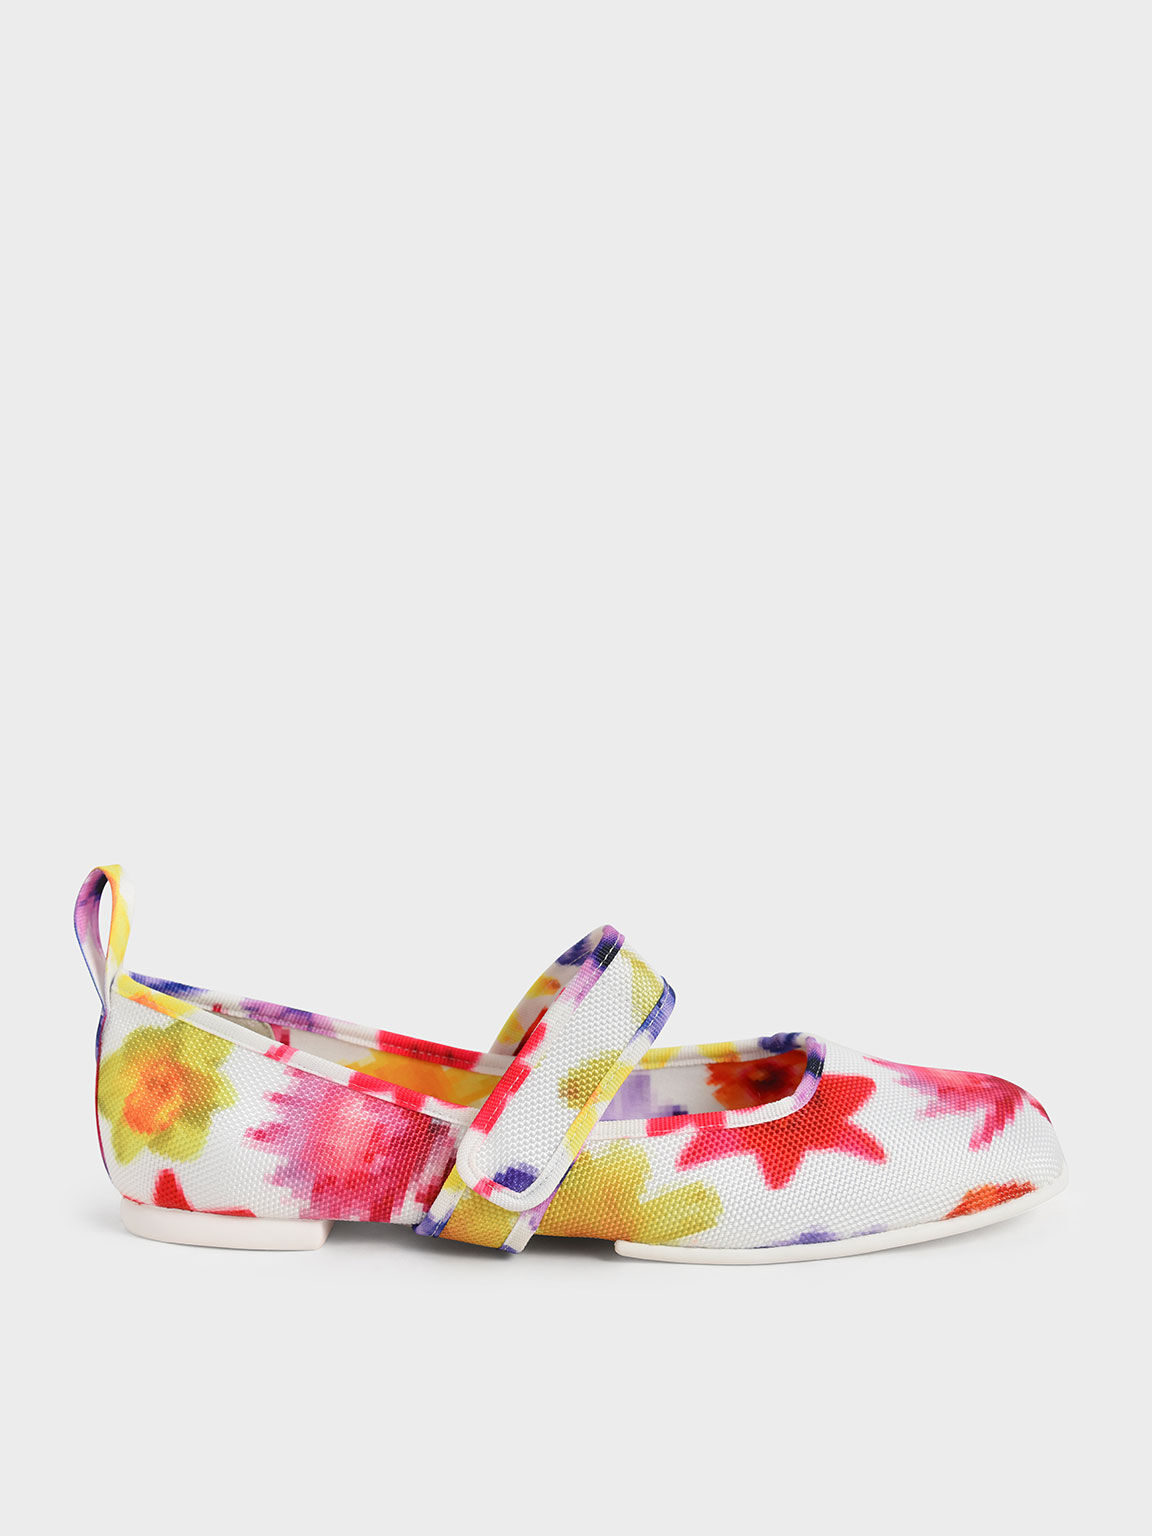 Nori Recycled Polyester Printed Mary Jane Flats, Multi, hi-res